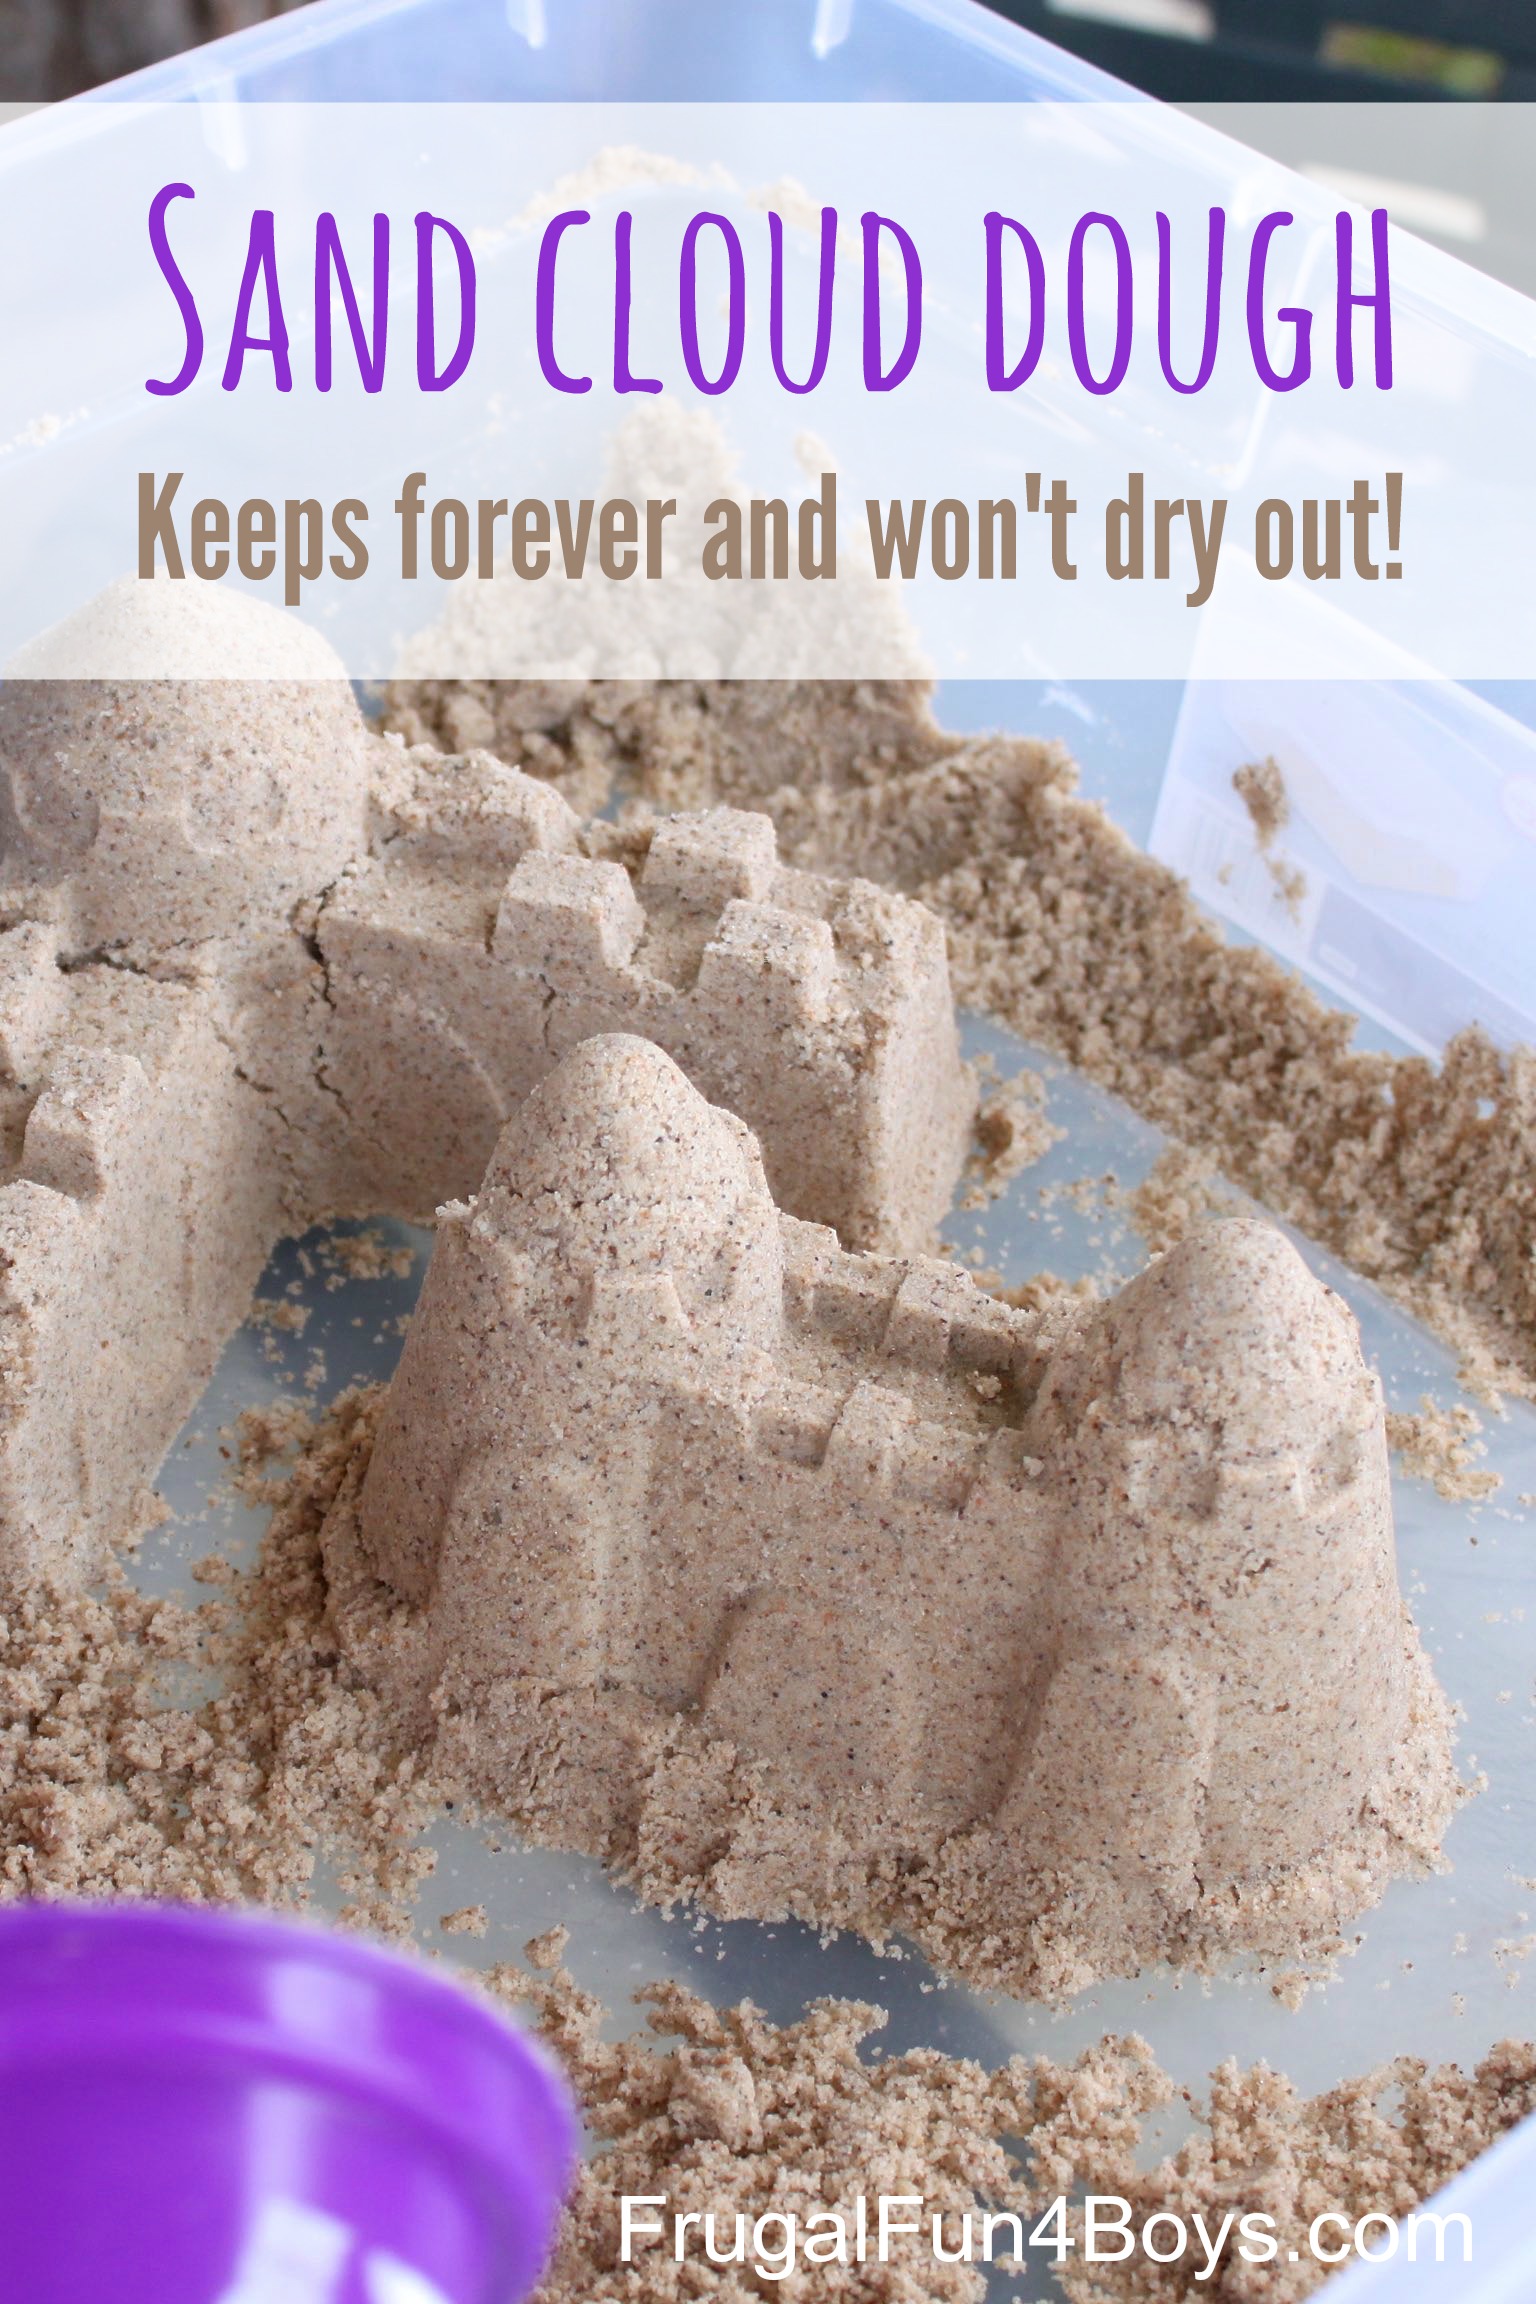 Sand Cloud Dough - This sticky sand dough keeps forever and doesn't dry out!